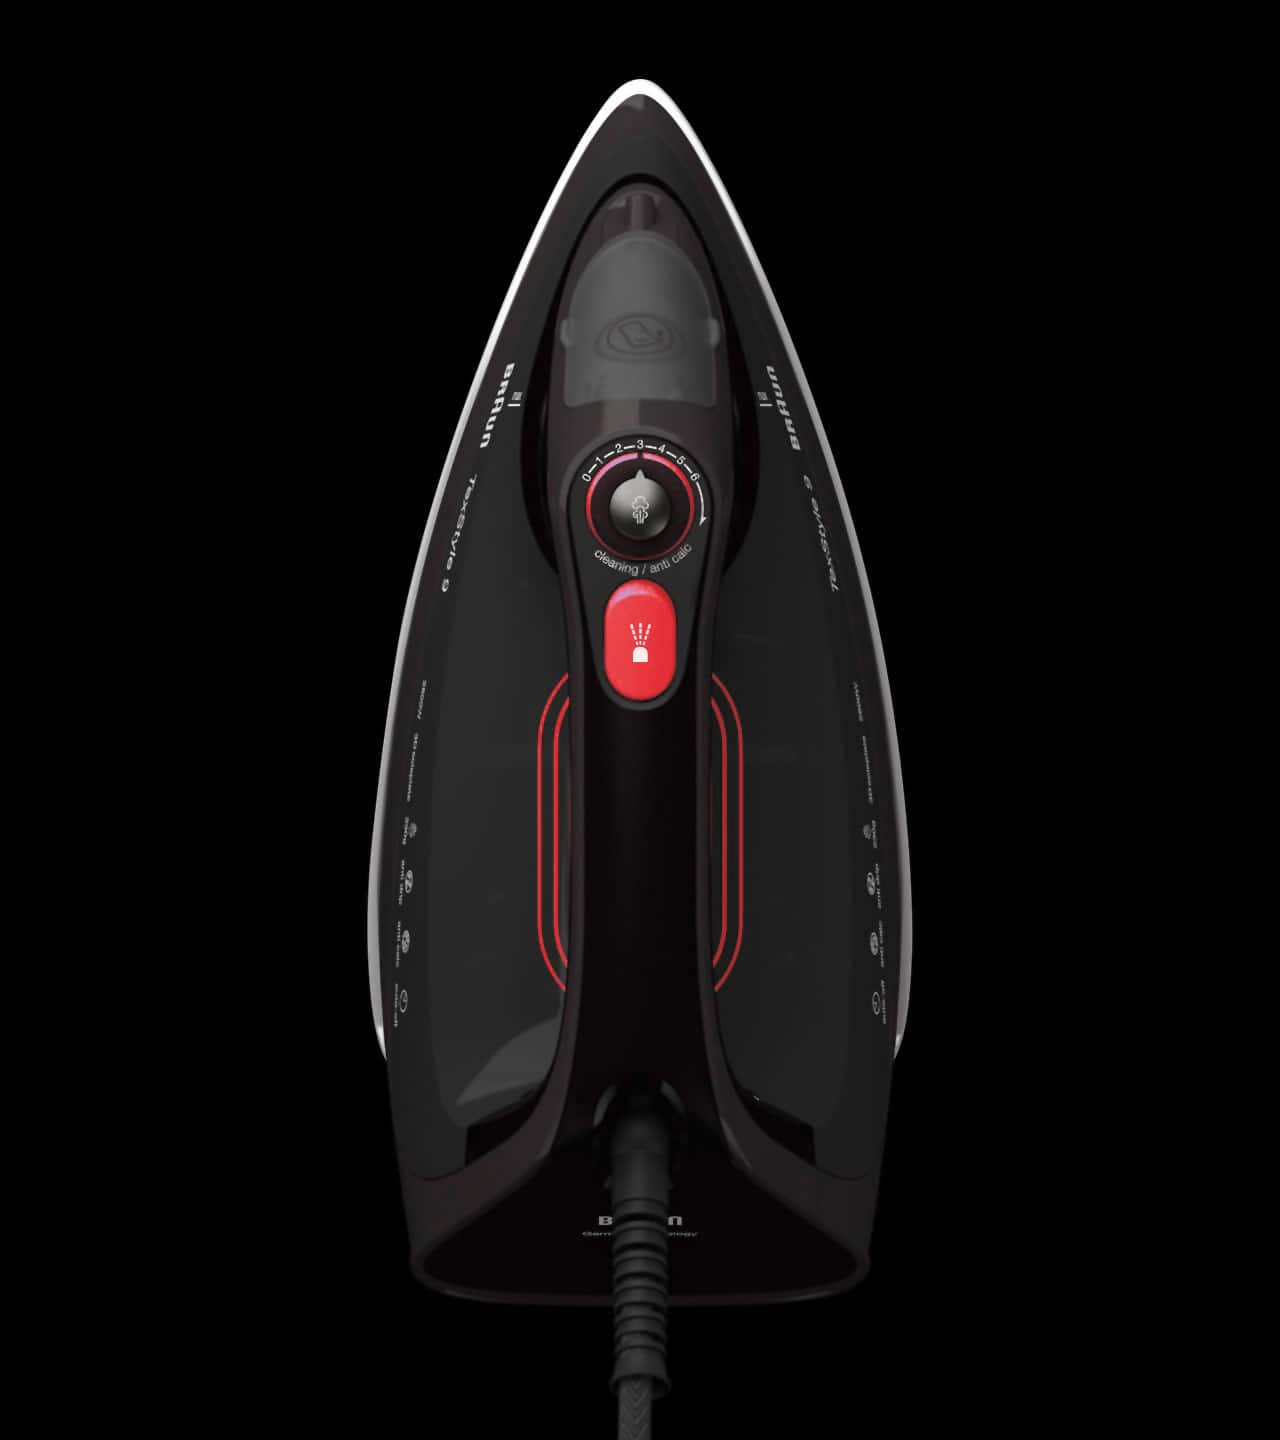 Braun TexStyle 9 steam iron – Ultimate power for great performance